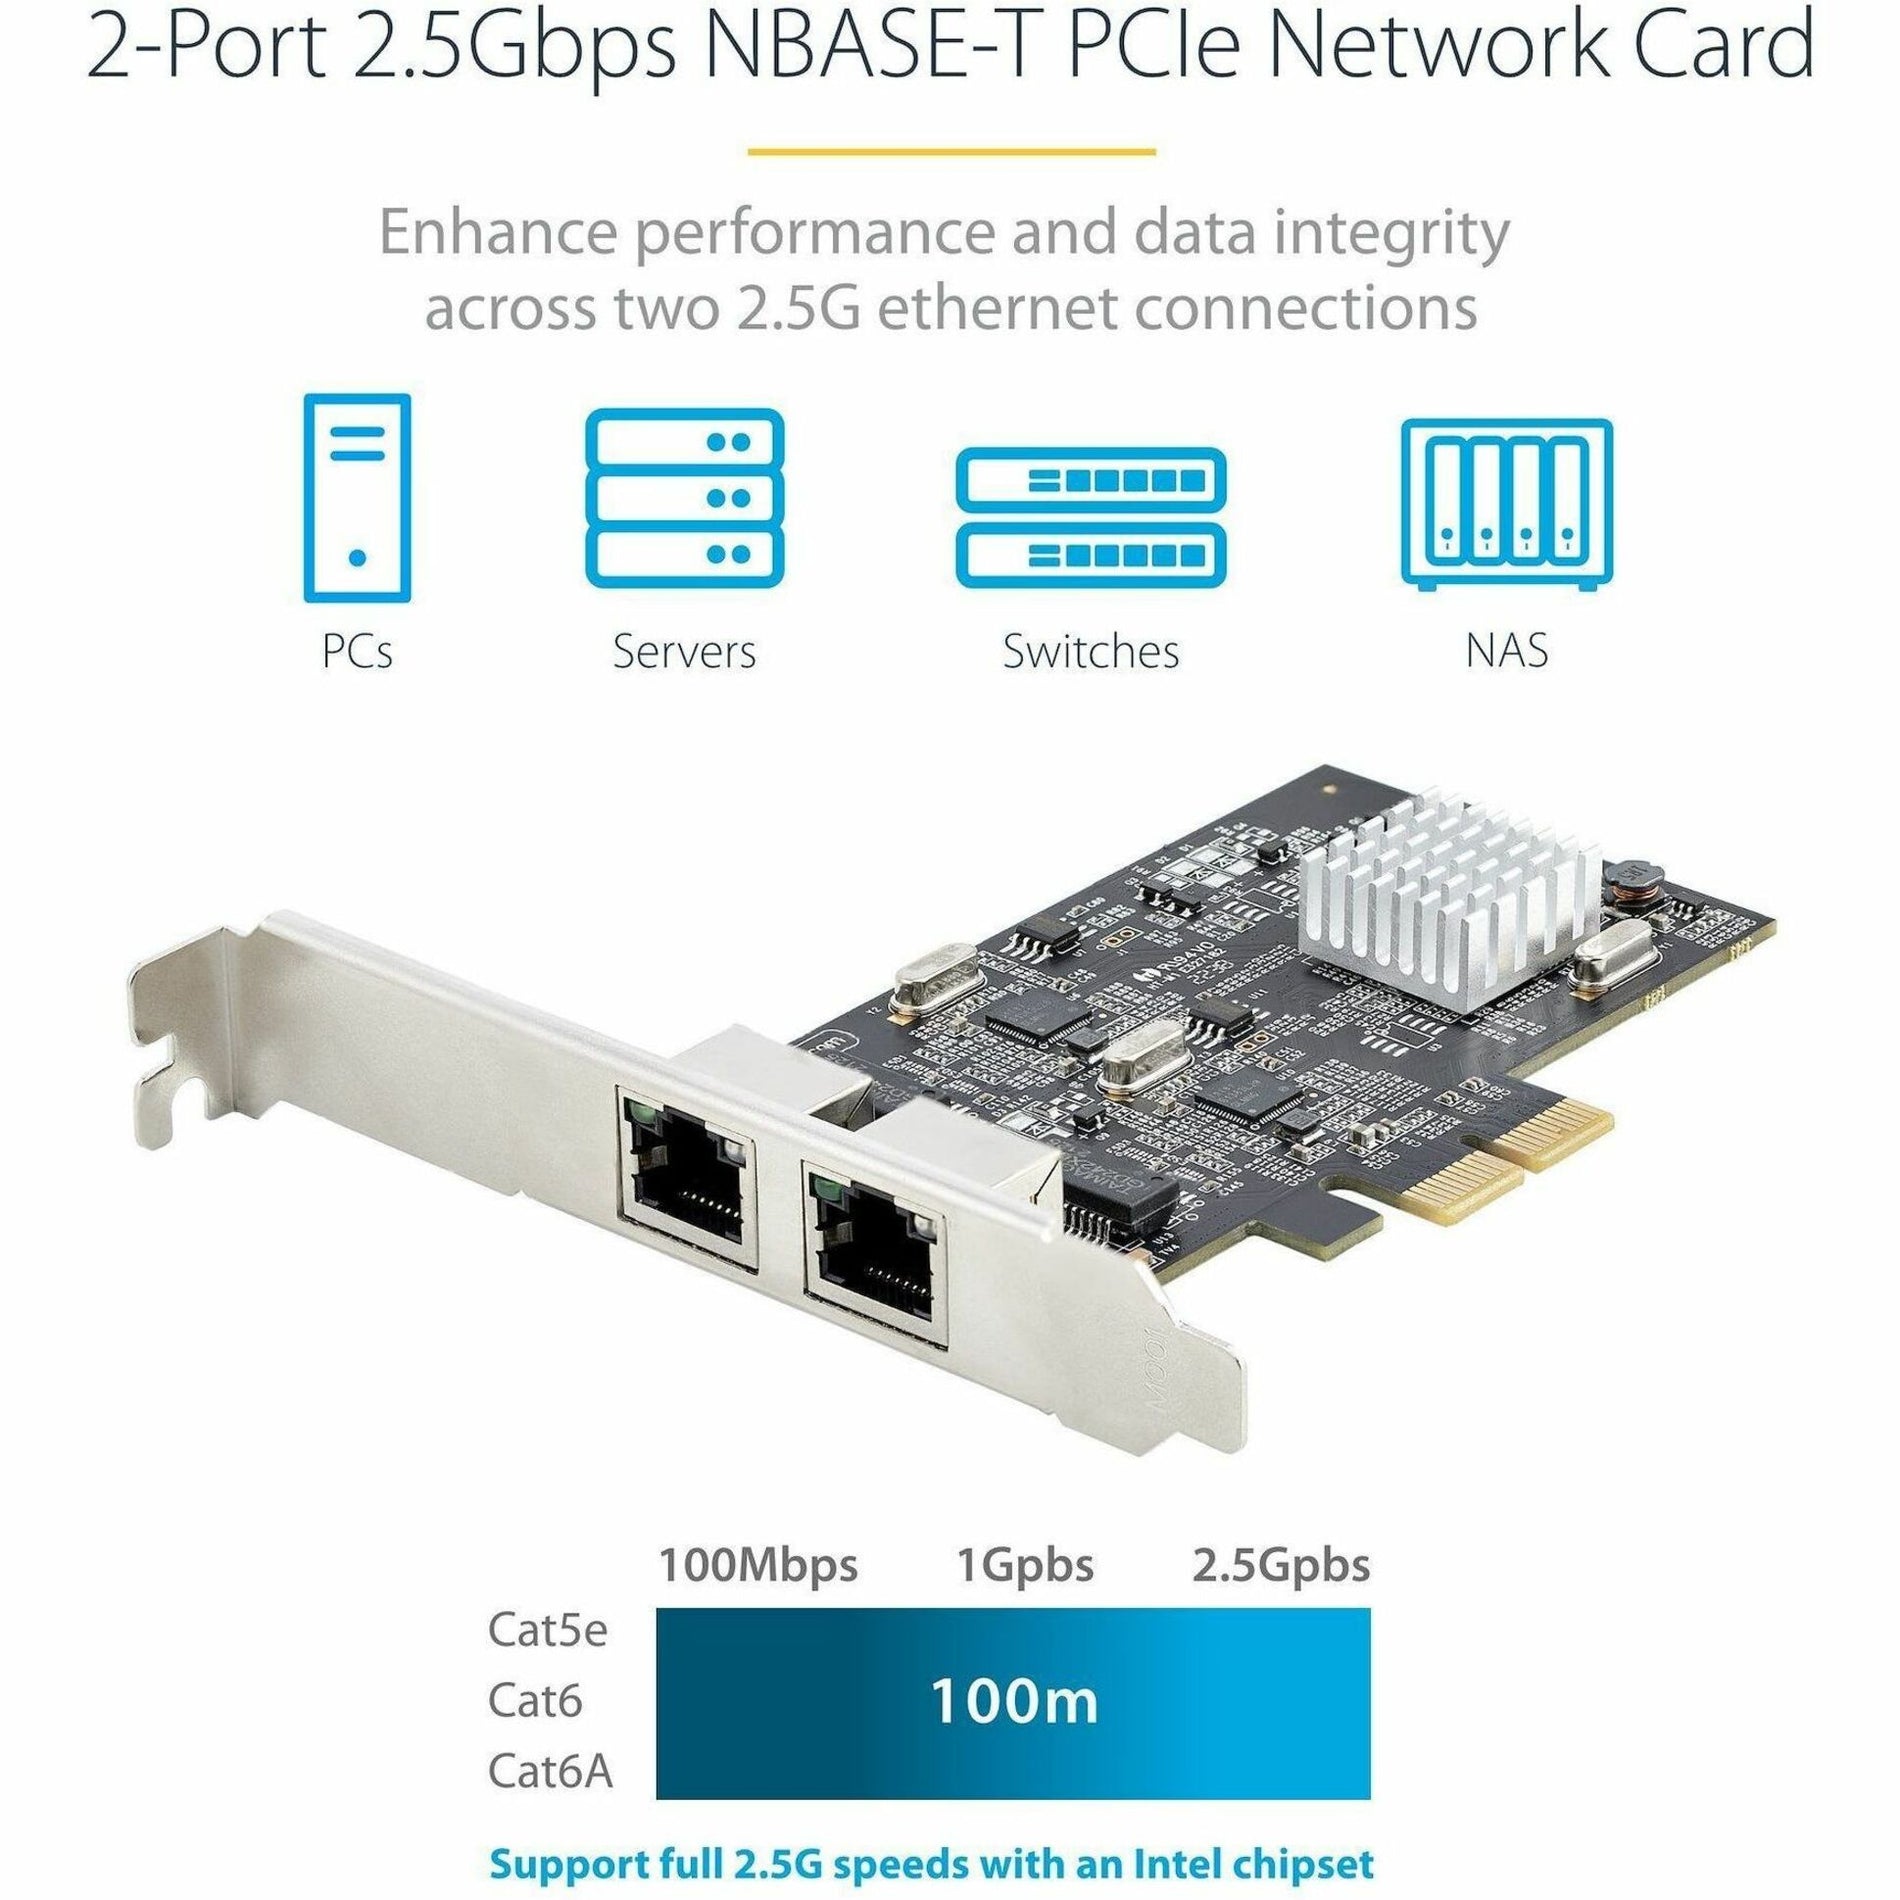 StarTech.com PR22GI-NETWORK-CARD 2-Port 2.5GBase-T Ethernet Network Adapter Card - PCIe 2.0 x2, High-Speed Network Connectivity